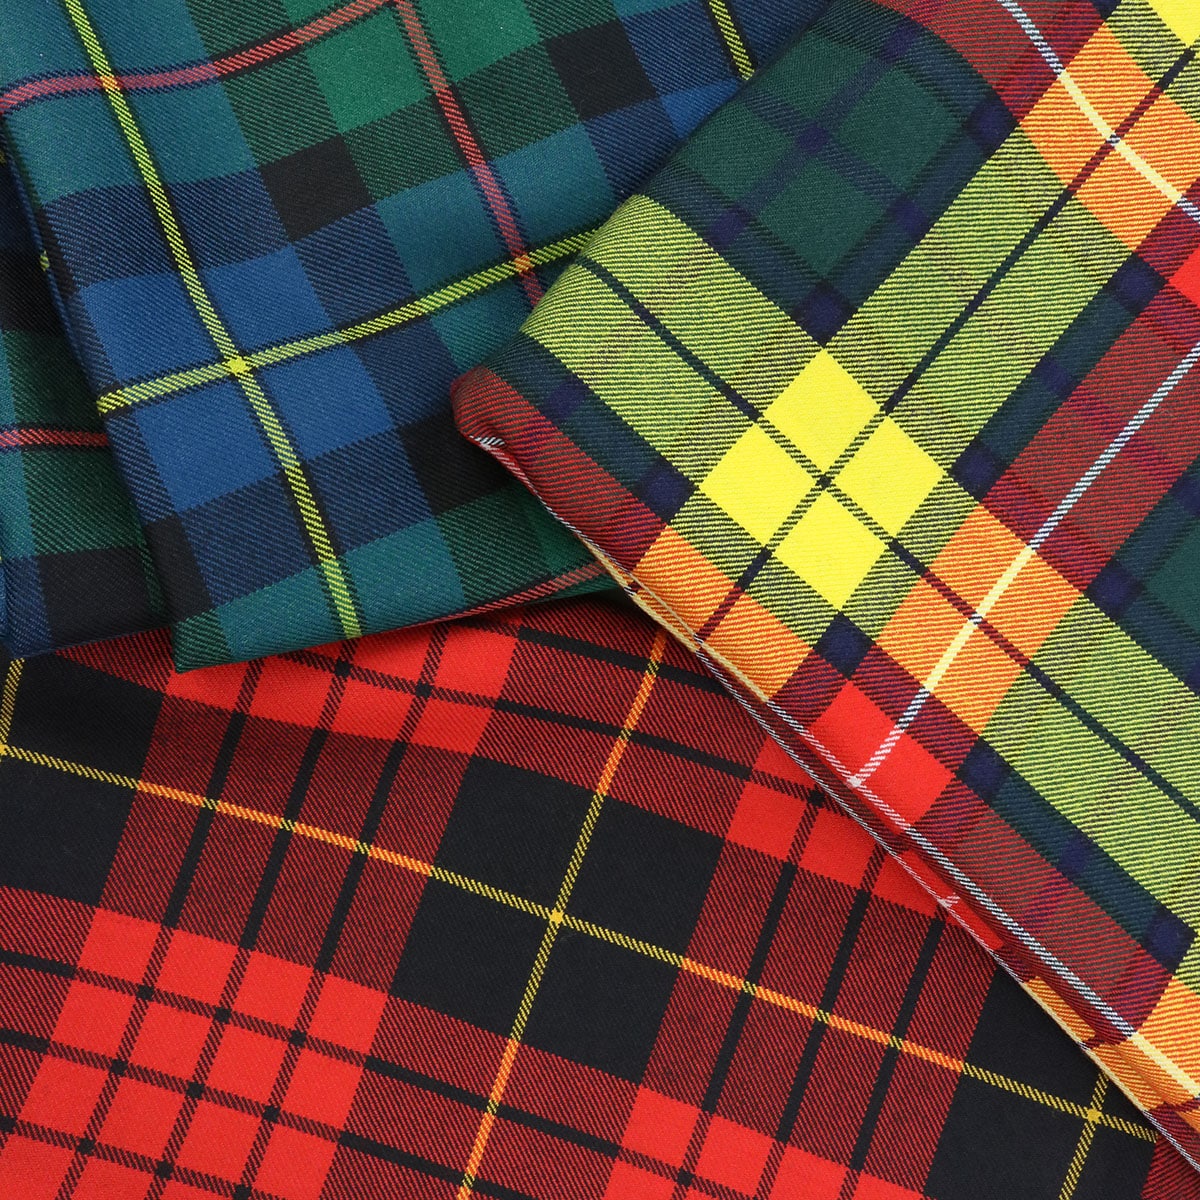 How to Wear Tartan If You’re Not Scottish